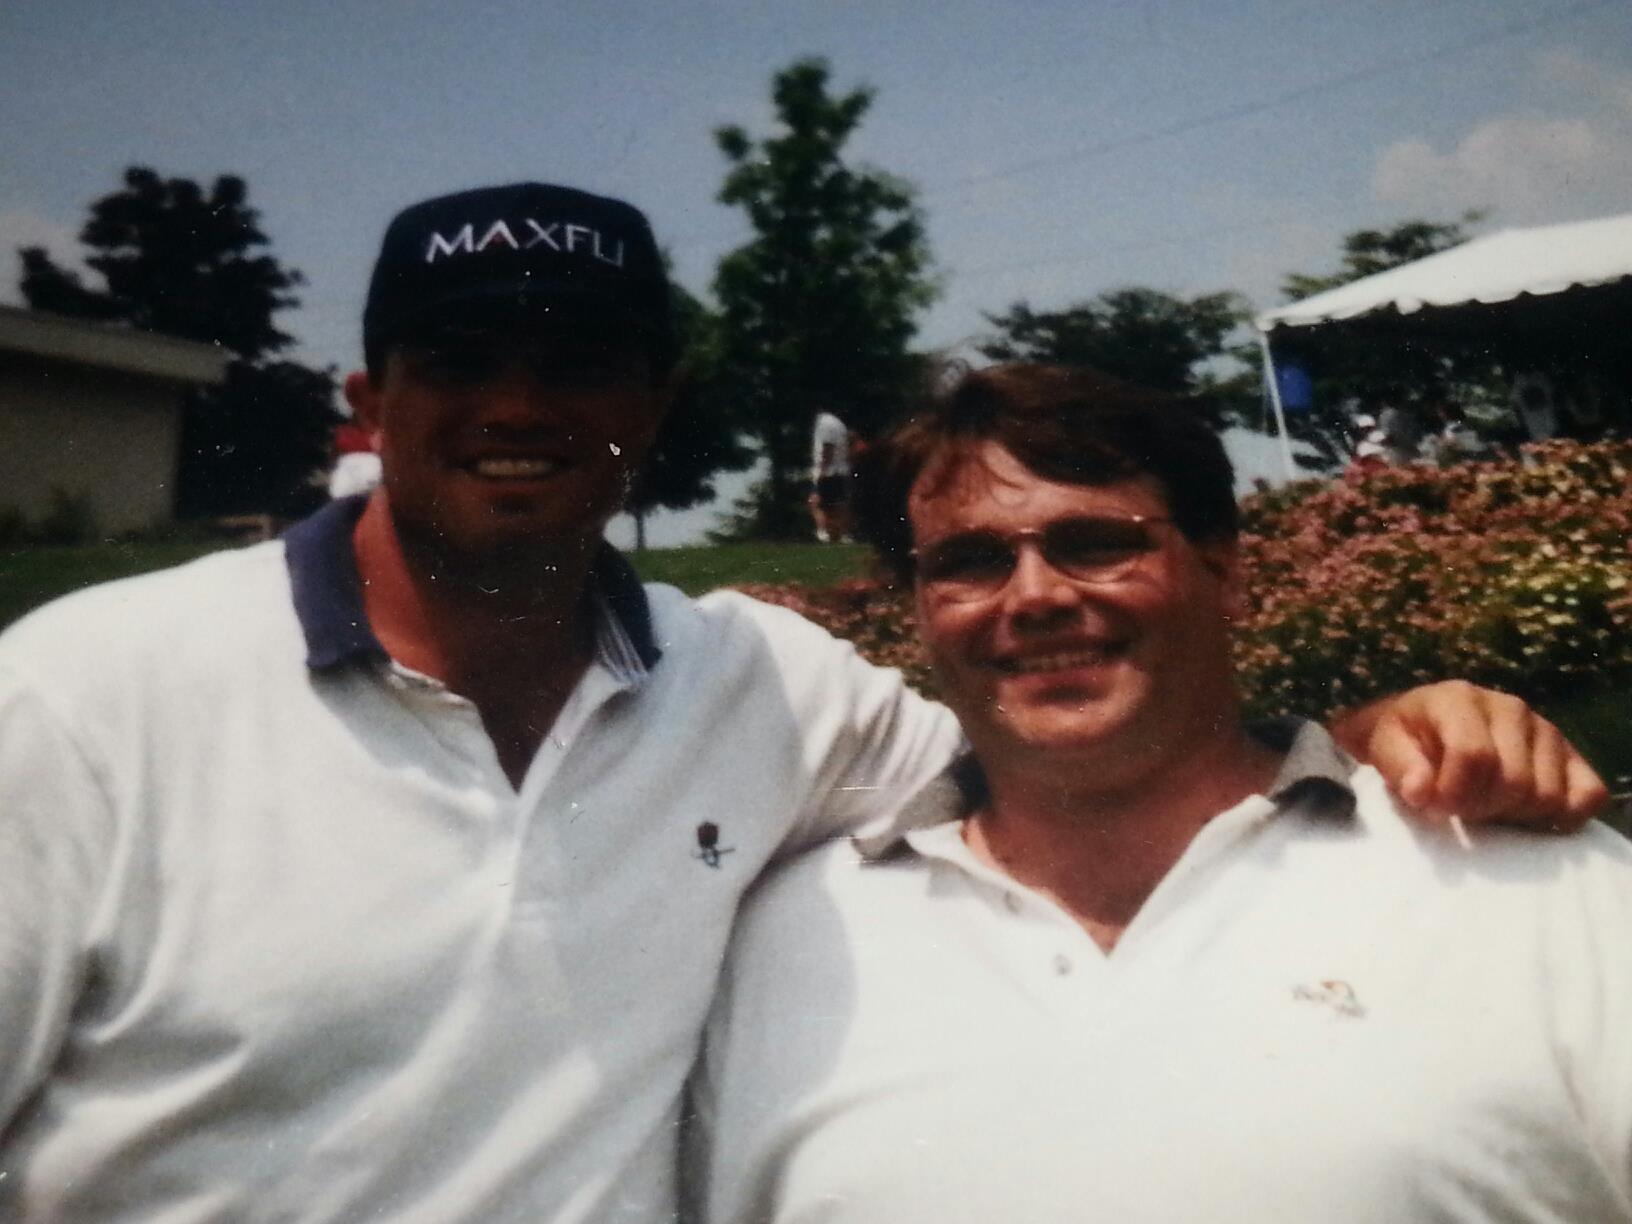 Me and Adam Baldwin at a golf outing in PA.